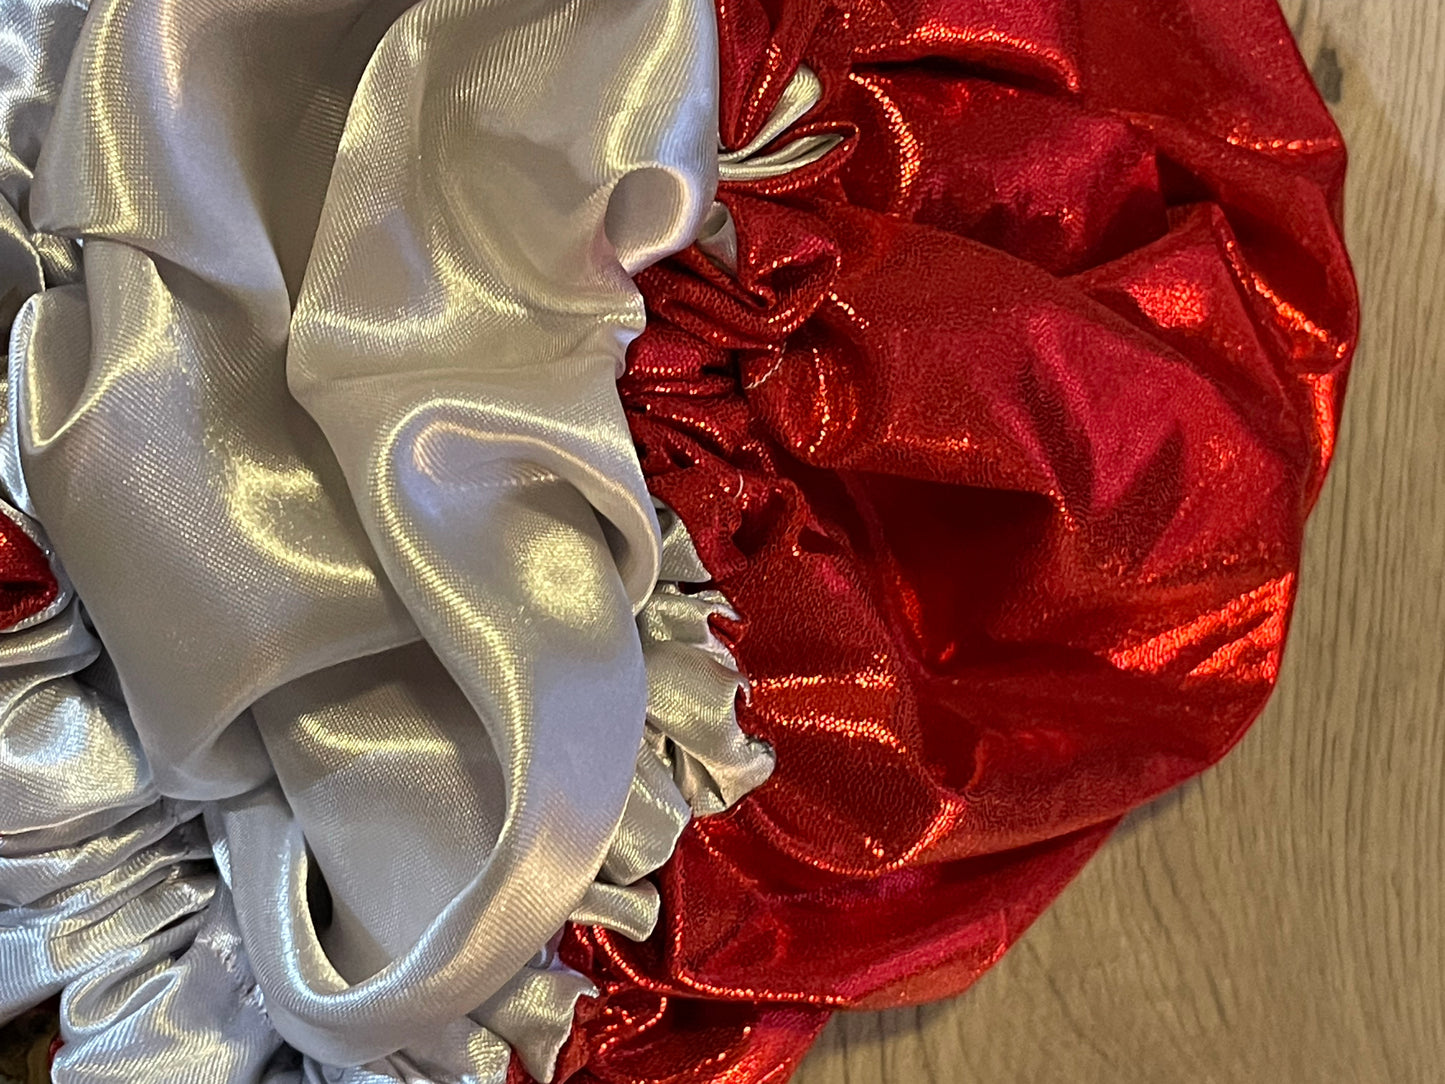 Metallic Silver bonnet with Red Satin lining